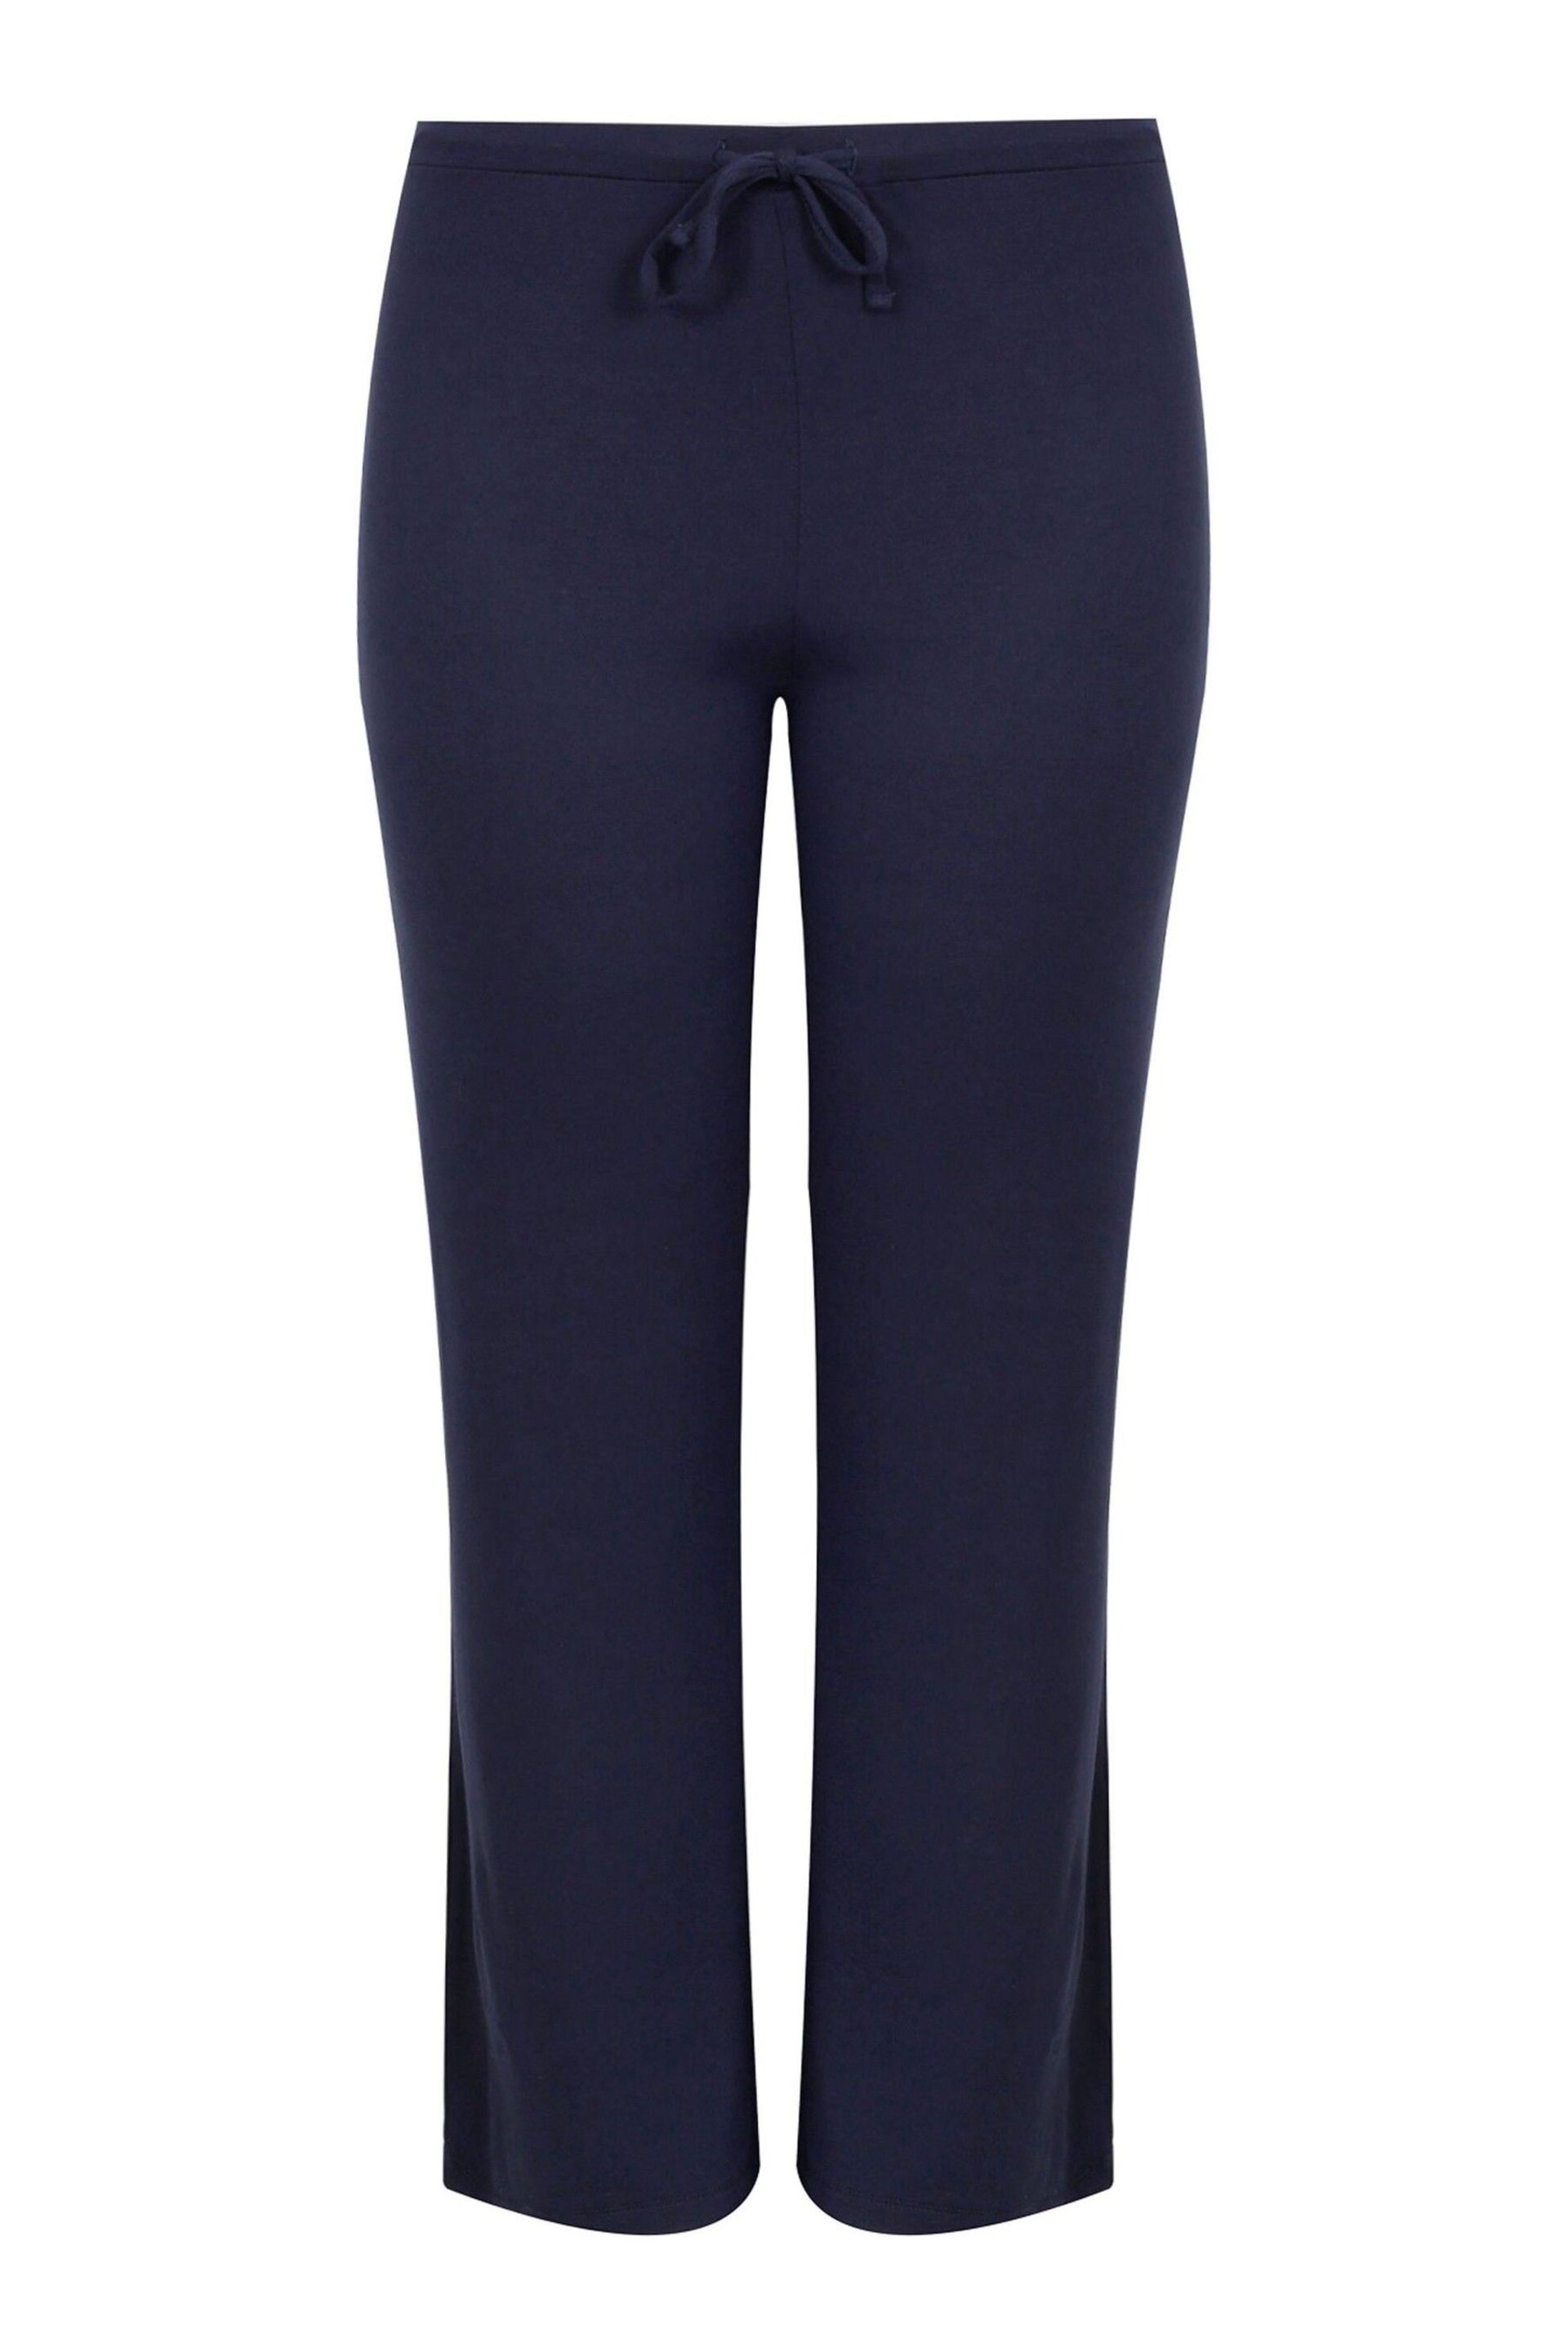 Yours Curve Blue Wide Leg Pull On Stretch Jersey Yoga Pant - Image 3 of 4